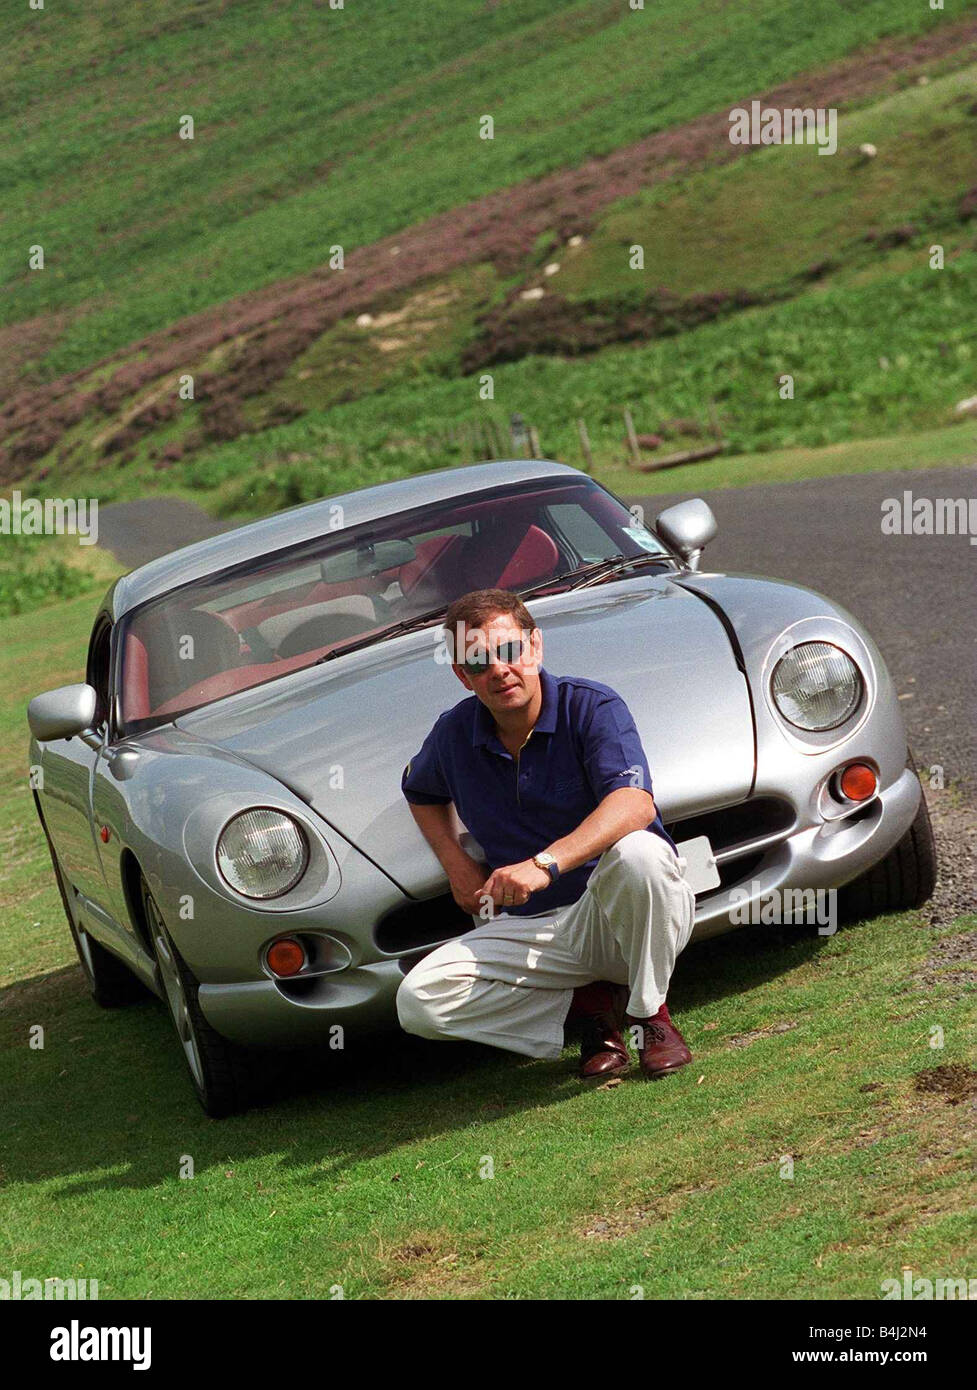 John Clelland sitting in front of a silver grey TVR Cerbera car August 1997 Stock Photo